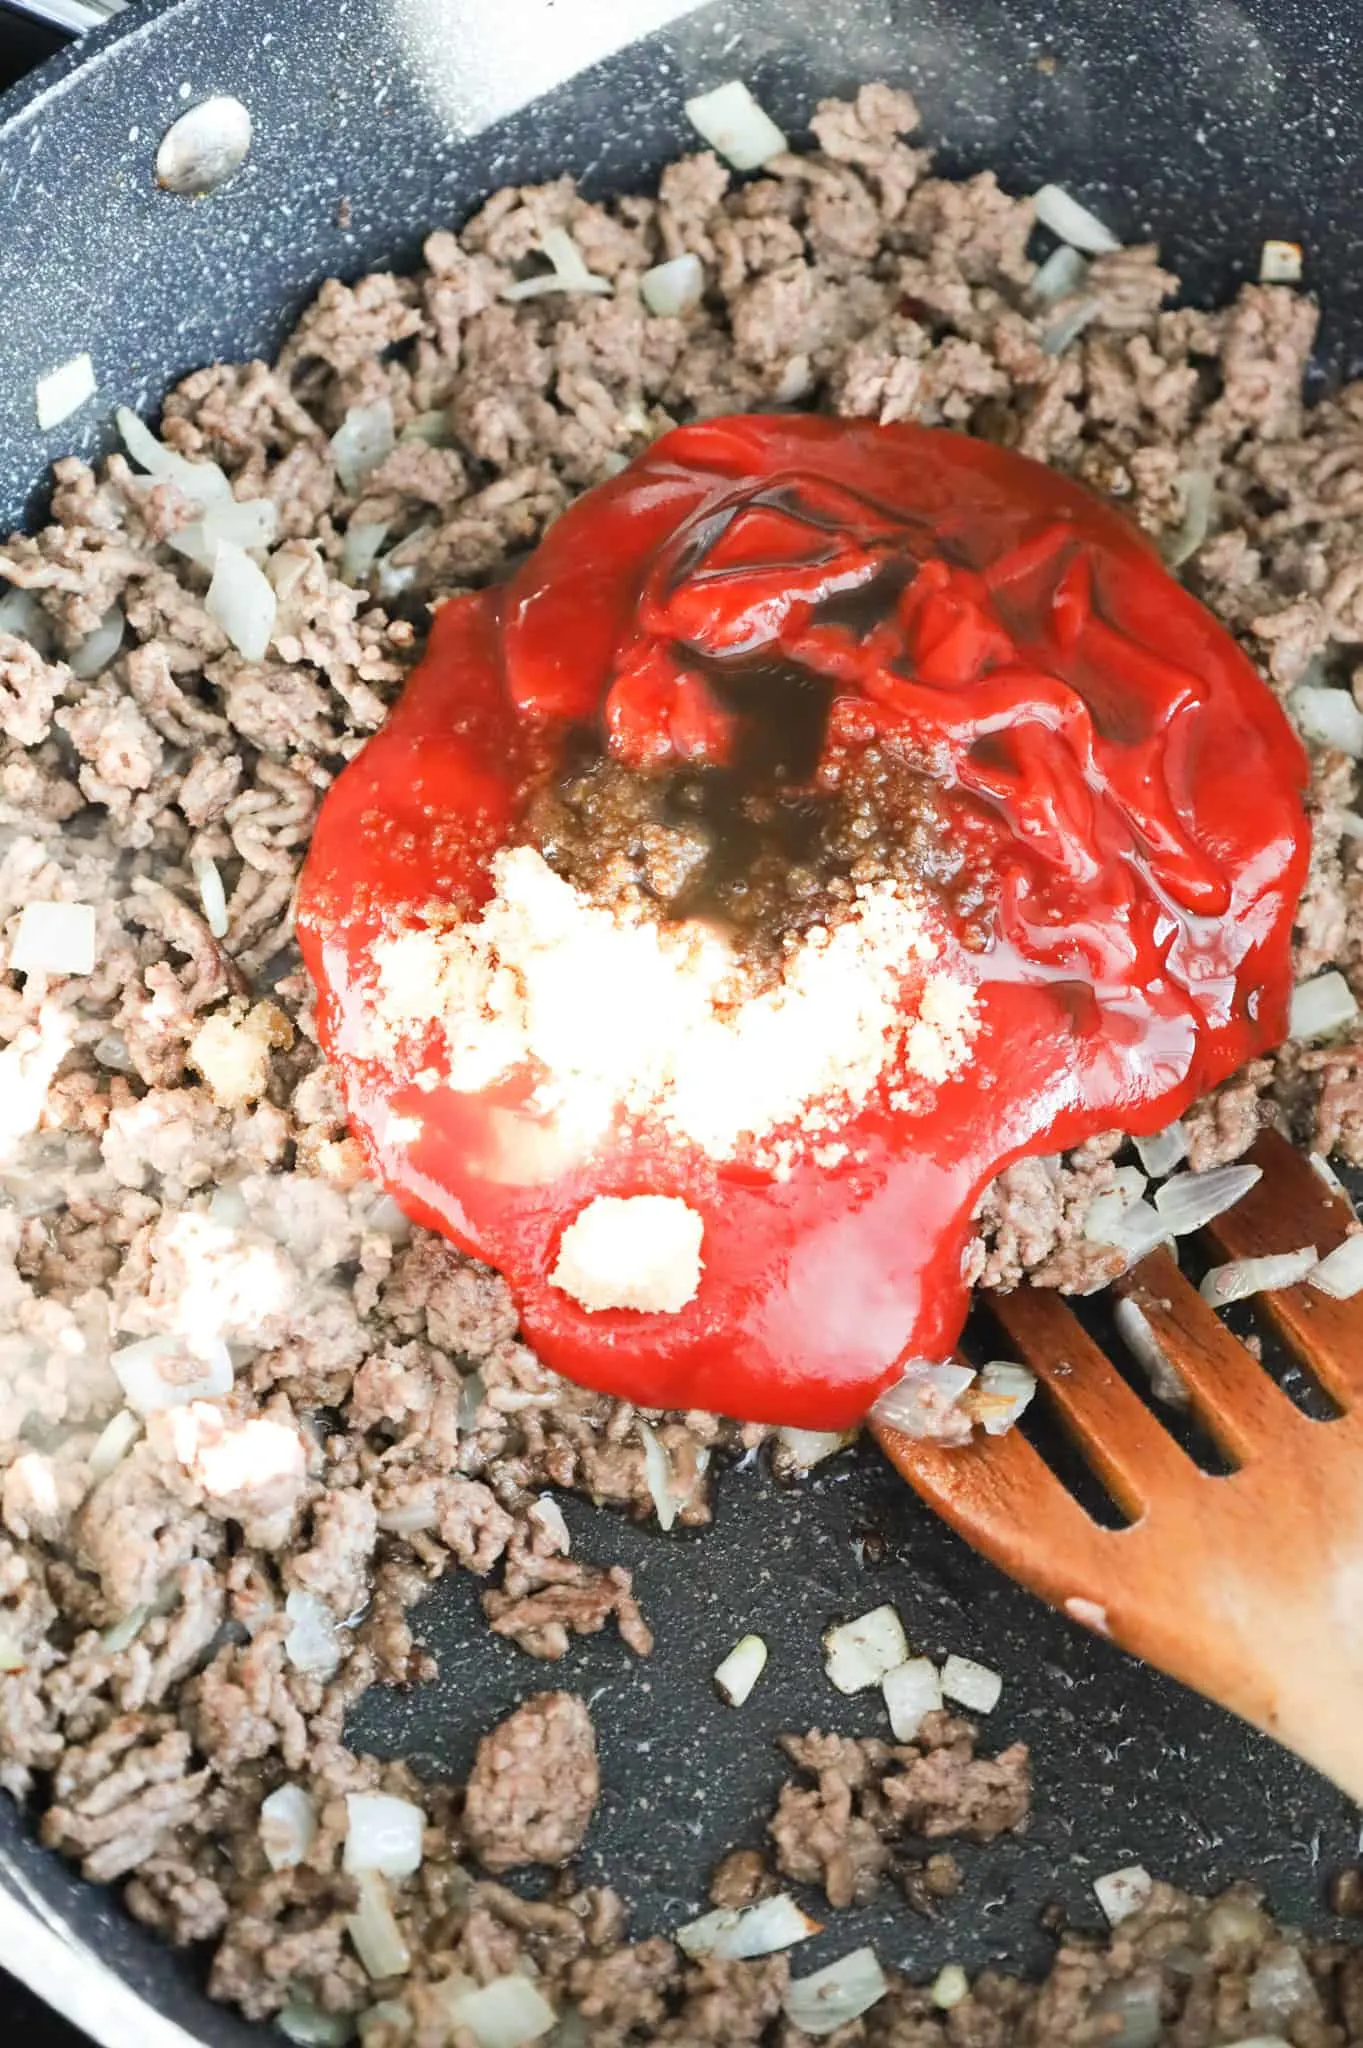 Worcestershire sauce, brown sugar and ketchup on top of ground beef in a skillet